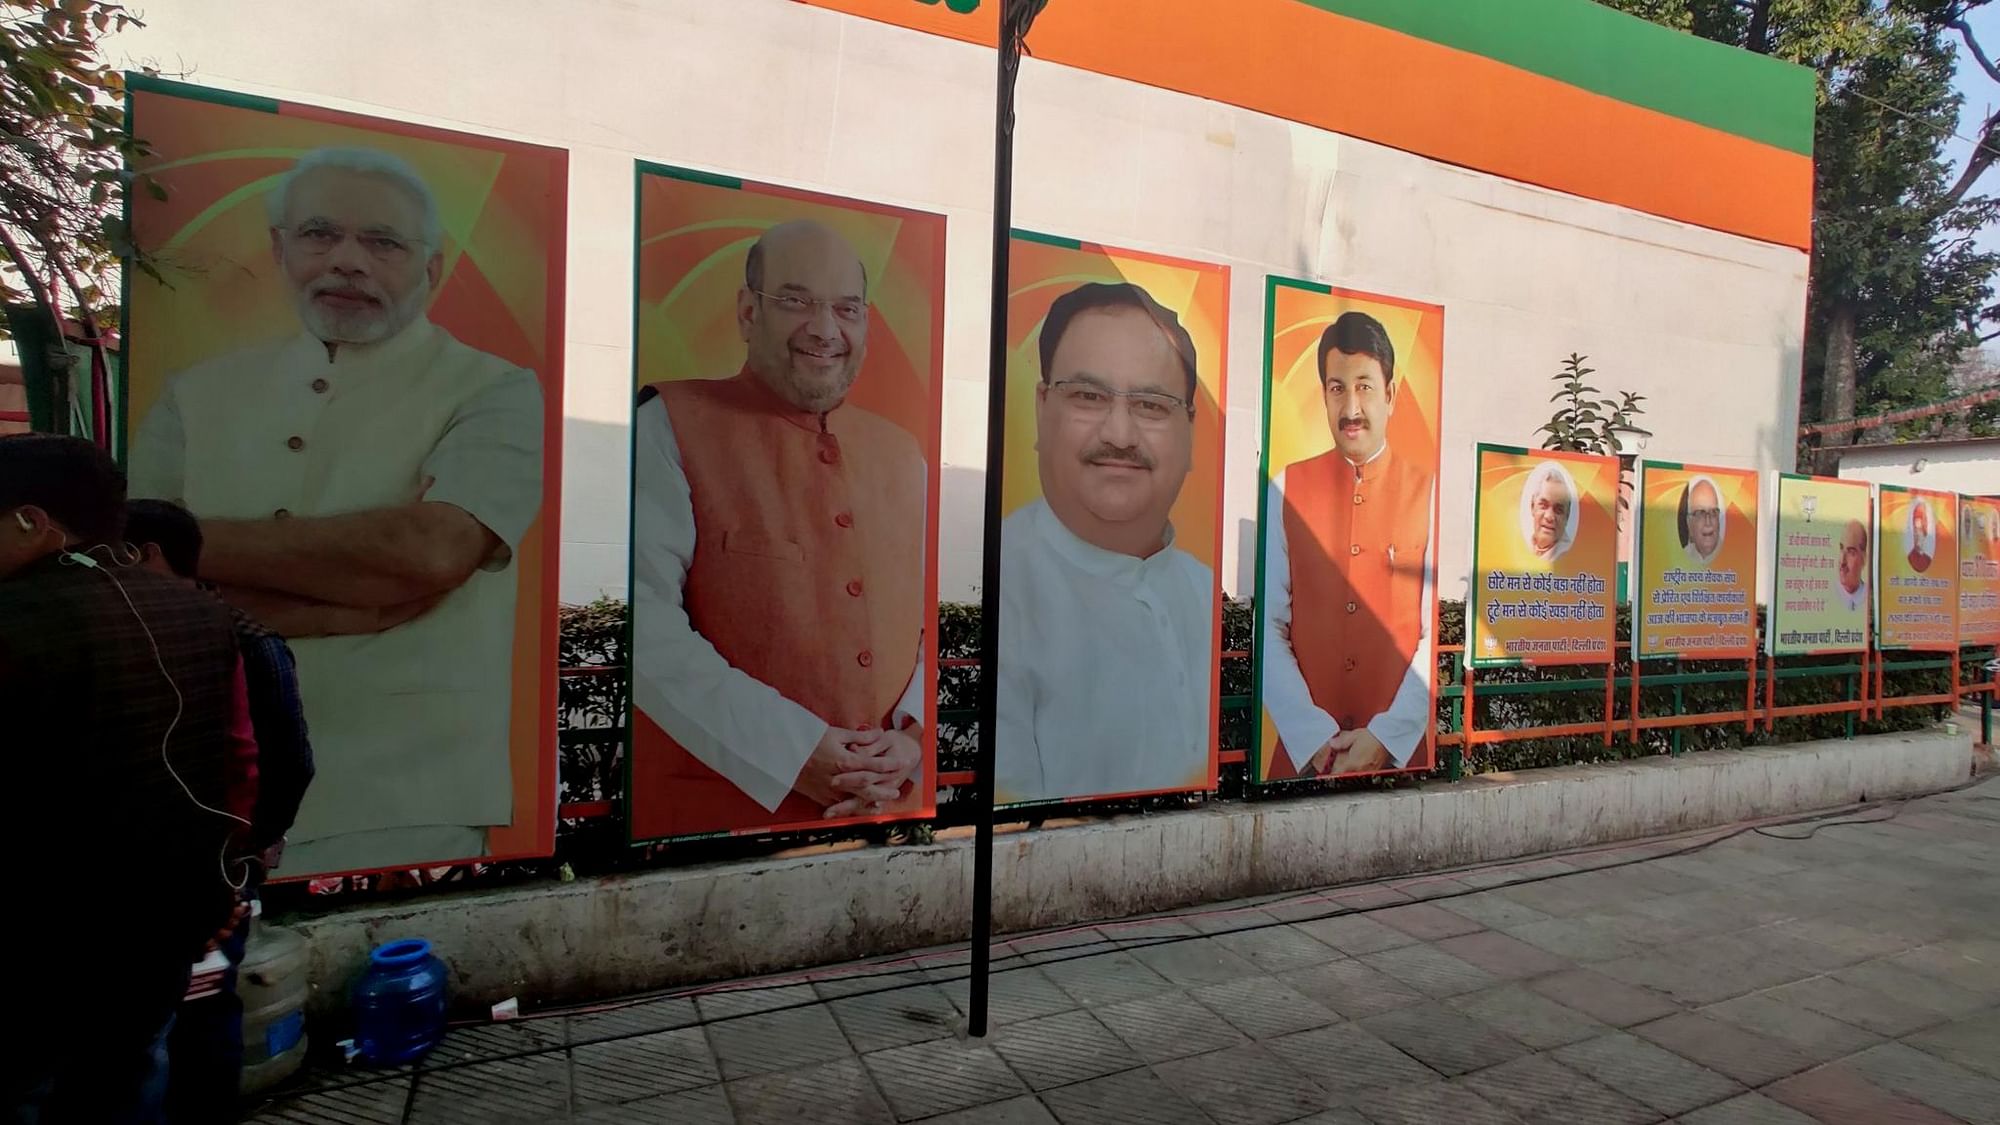 The BJP Delhi headquarters wore a deserted look on the day of the results, with no prominent spokespersons or celebrations.